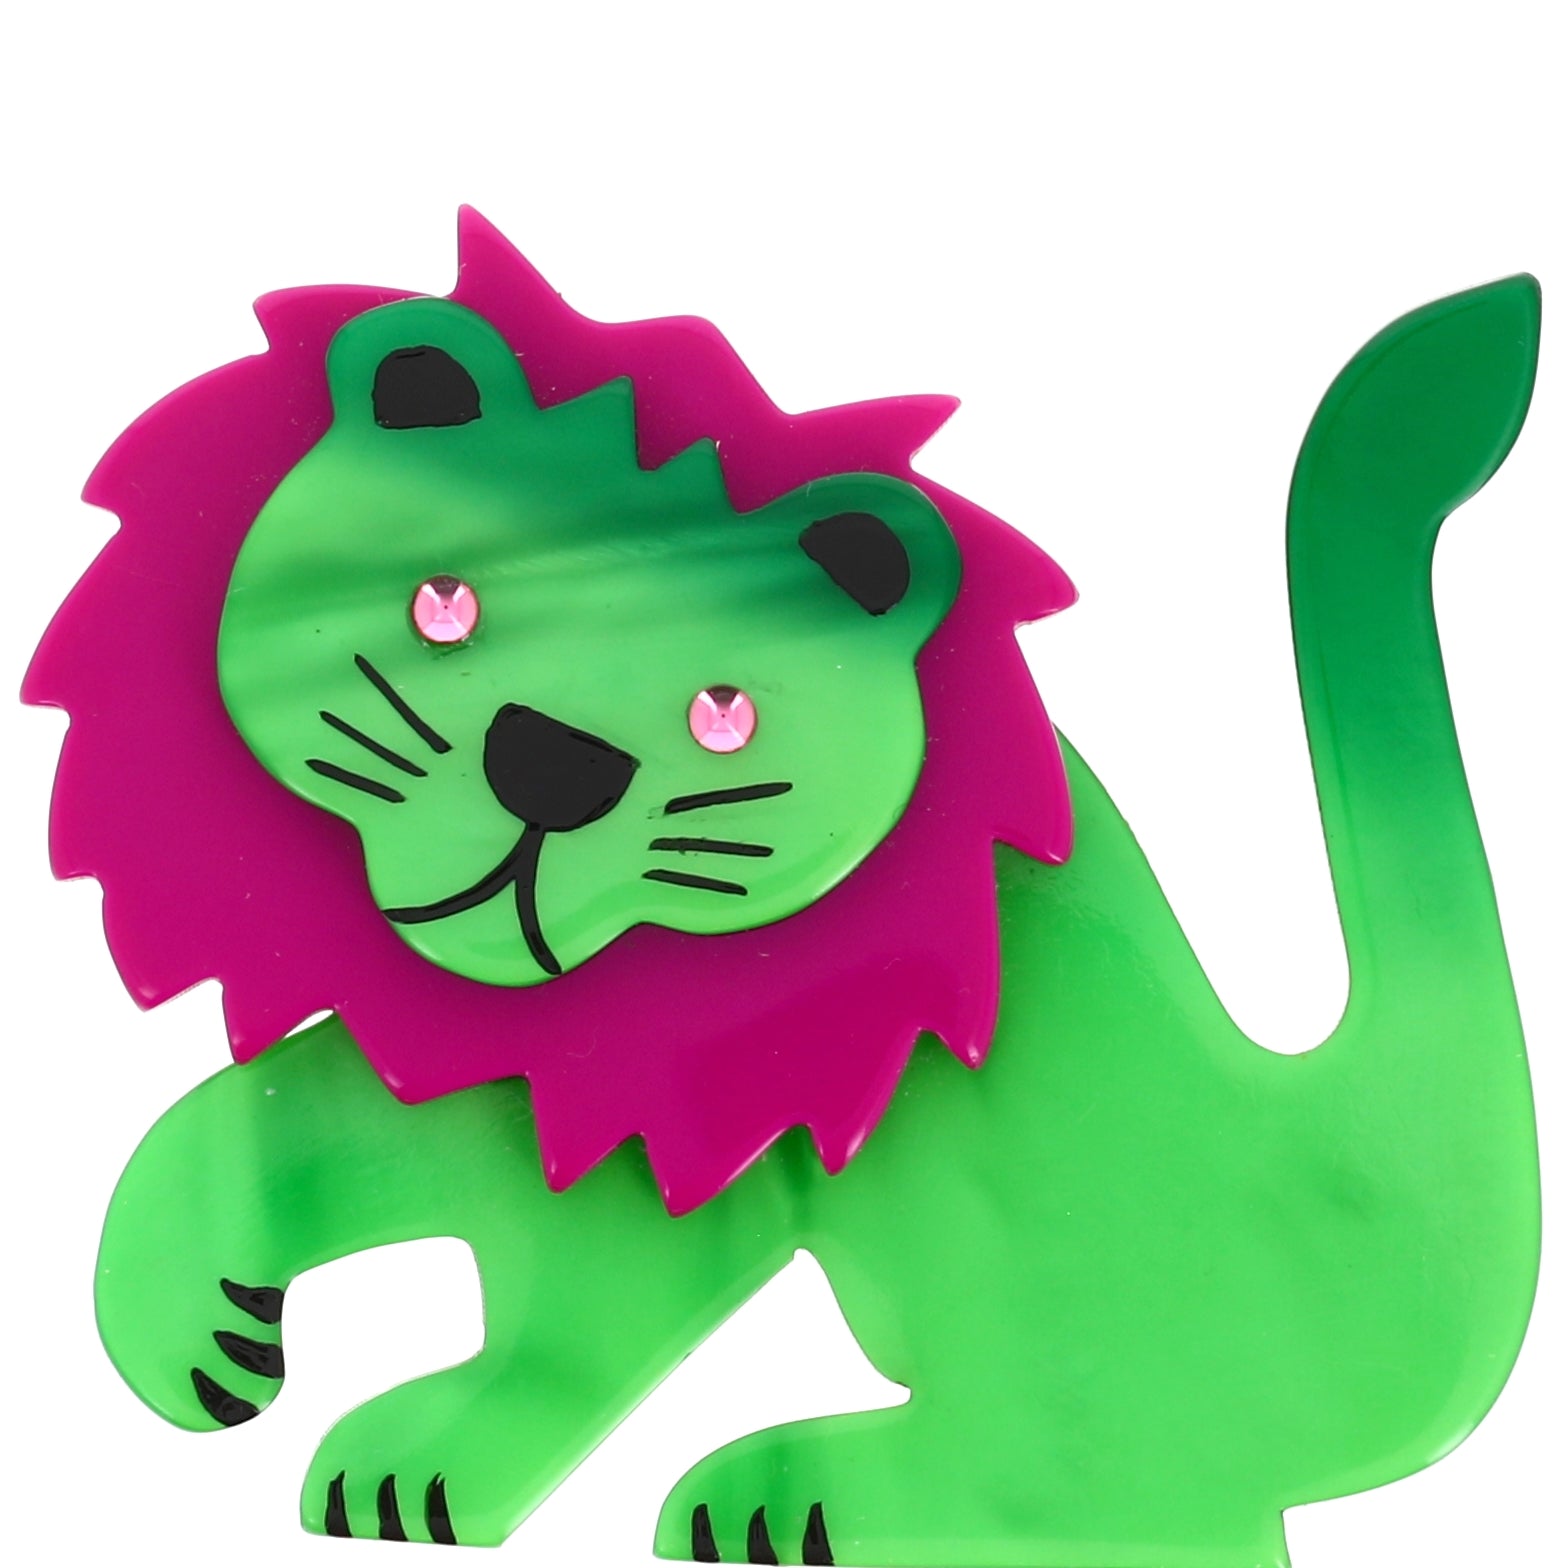 Mint and Cyclamen Leo Lion Brooch in galalith